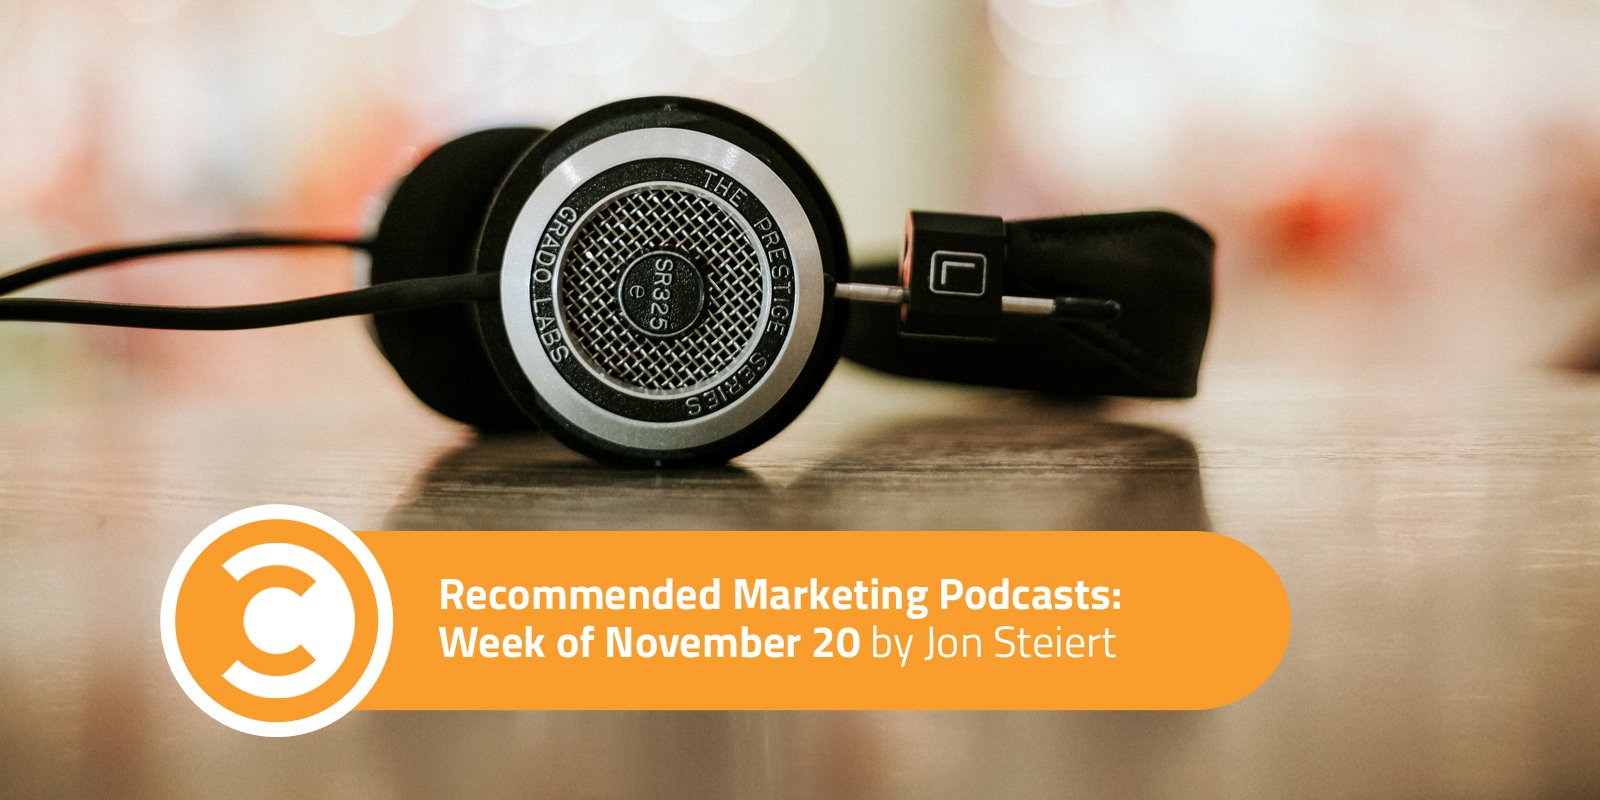 Recommended Marketing Podcasts Week of November 20